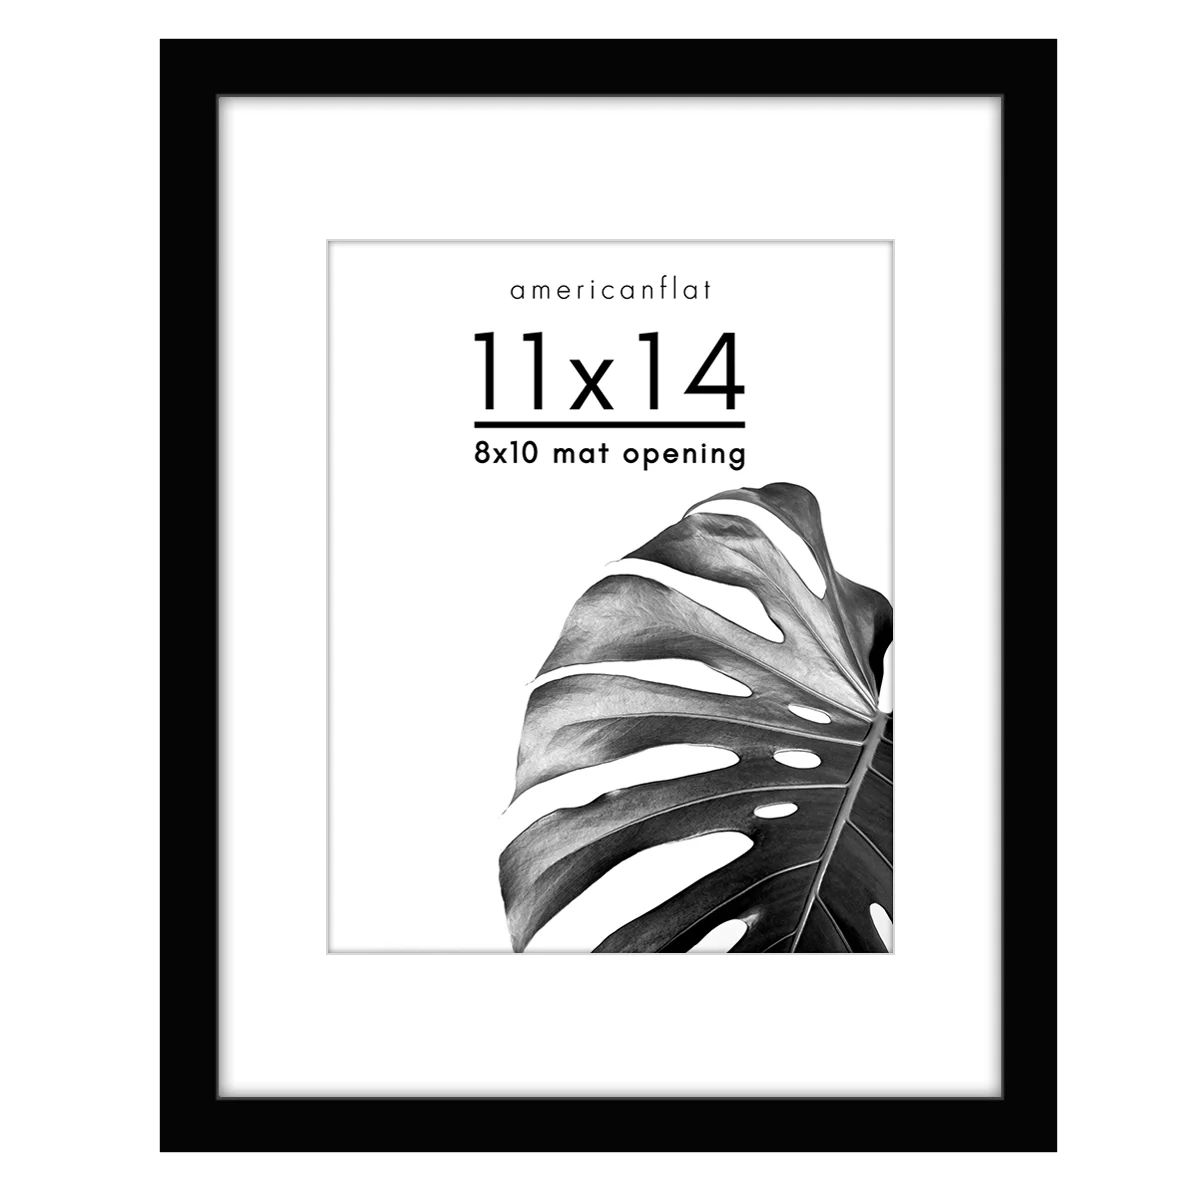 Americanflat 11x14 Picture Frame with 8x10 Mat - Wood with Glass Cover - Black | Walmart (US)